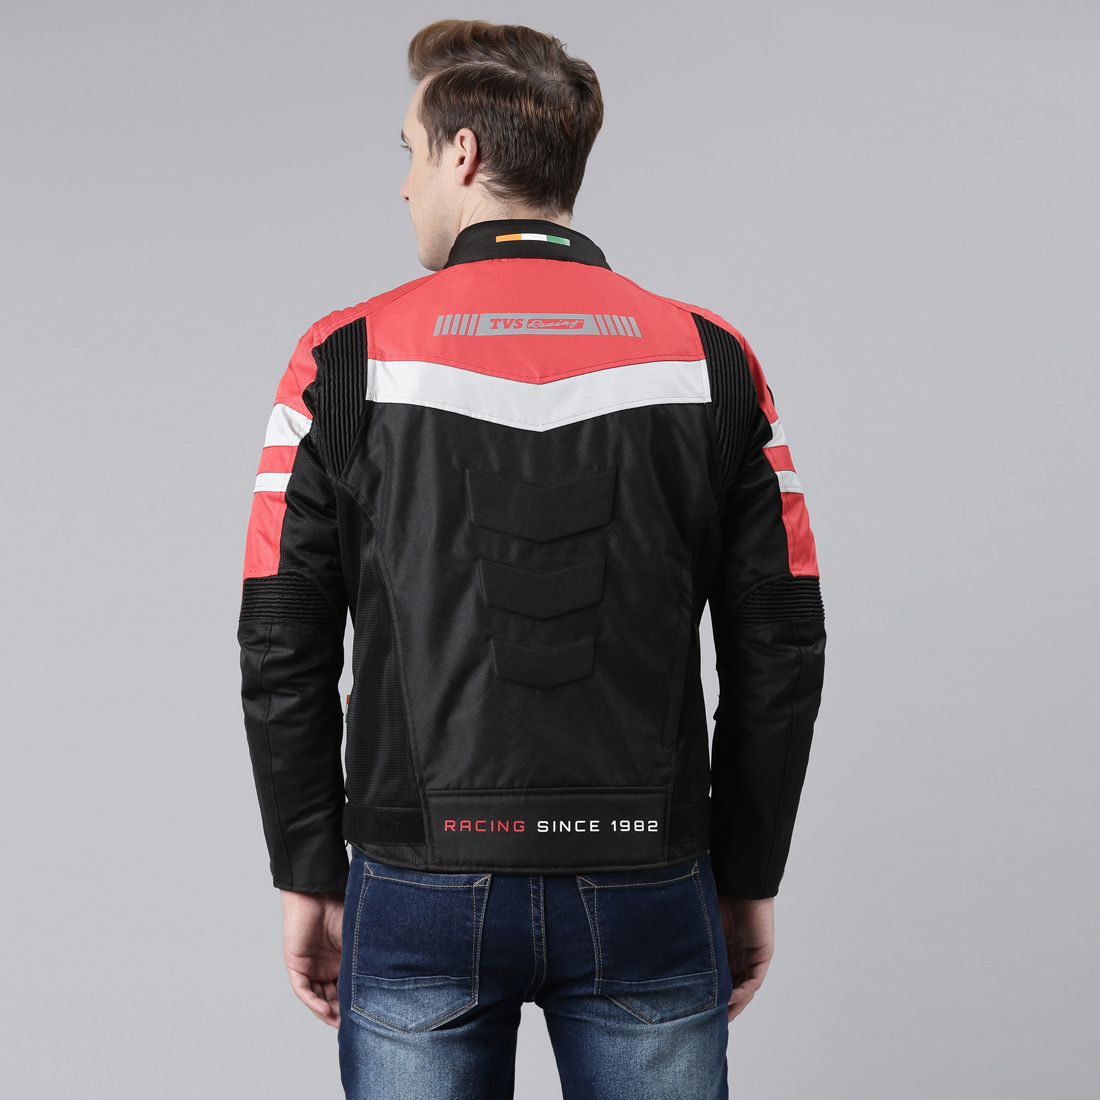 TVS NF301200 Riding Protective Jacket Price in India - Buy TVS NF301200  Riding Protective Jacket online at Flipkart.com